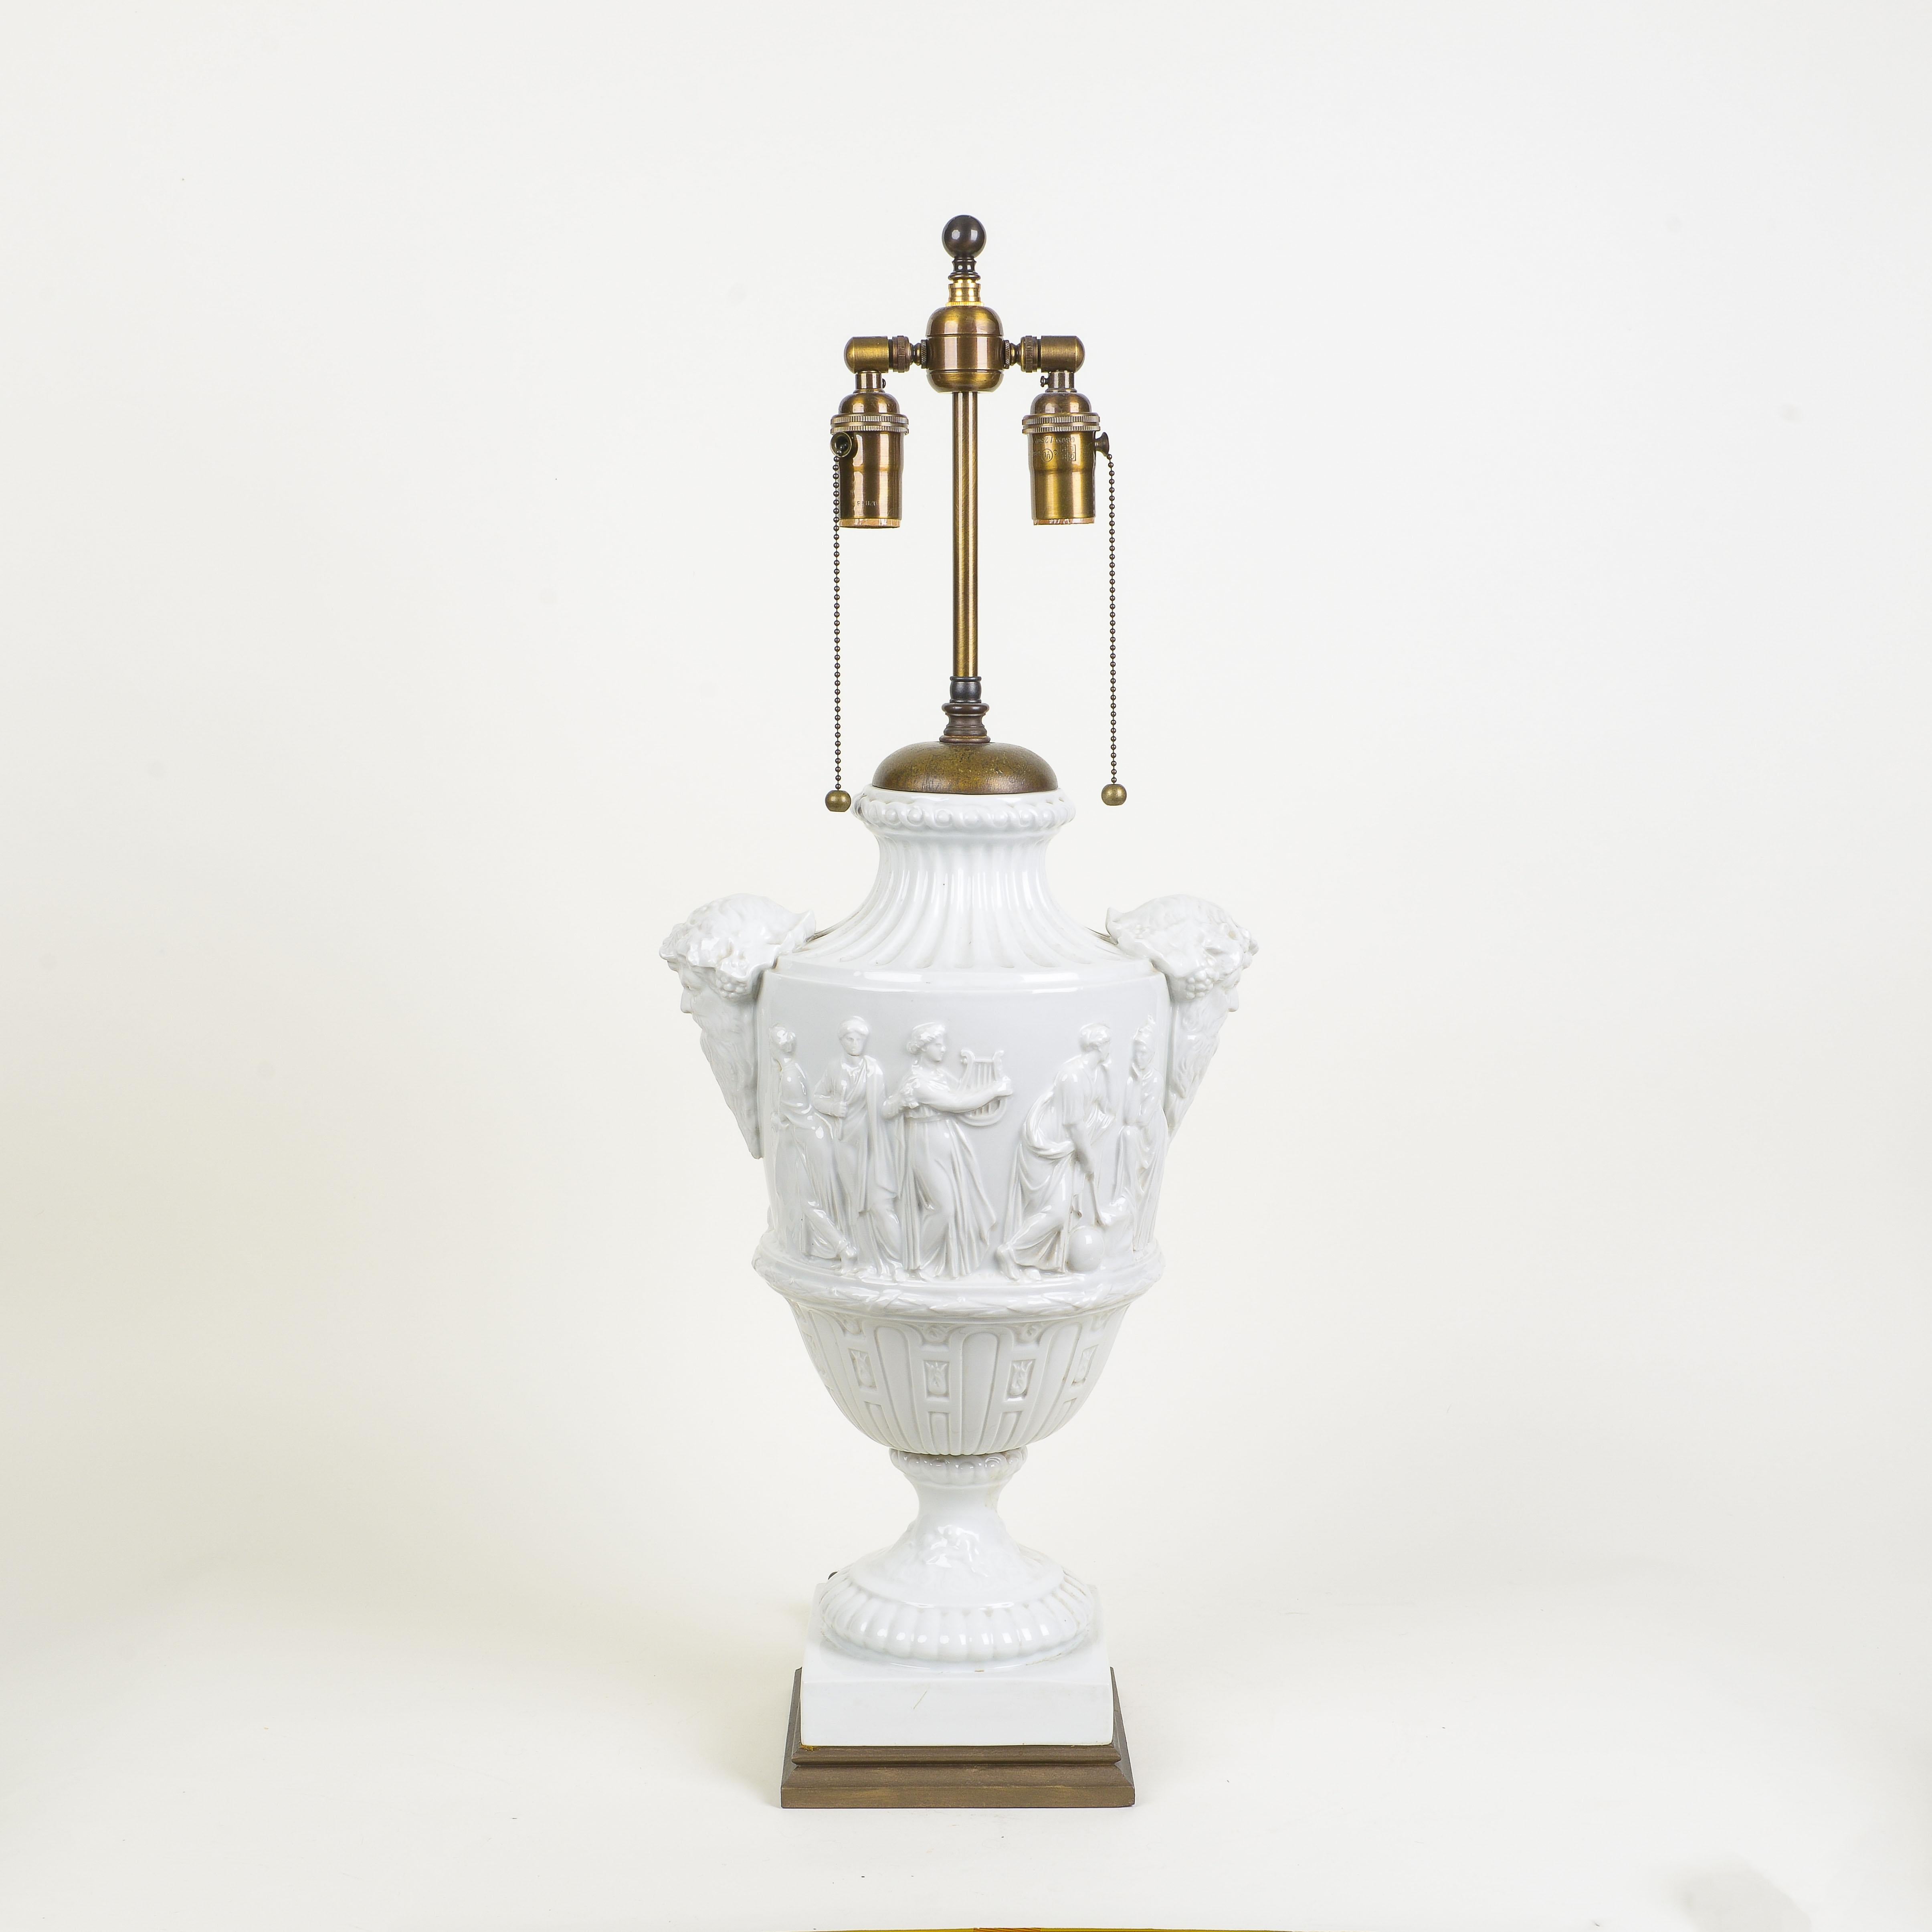 A Large Neoclassical White Ceramic Urn as Table Lamp In Excellent Condition For Sale In New York, NY